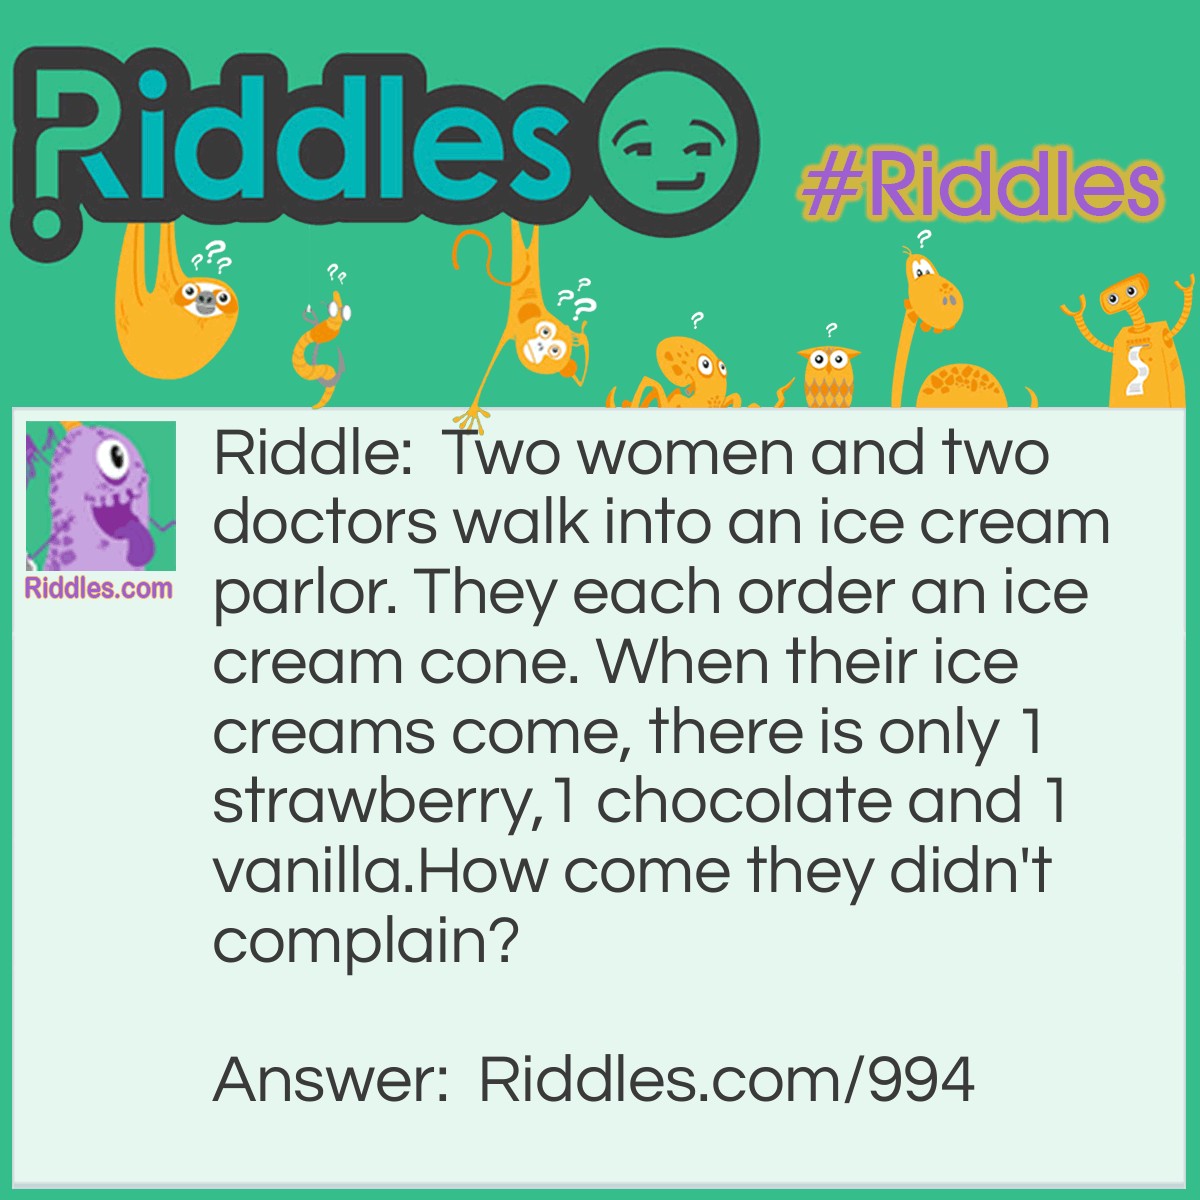 Riddle: Two women and two doctors walk into an ice cream parlor. They each order an ice cream cone. When their ice creams come, there is only 1 strawberry,1 chocolate and 1 vanilla.
How come they didn't complain? Answer: One of the women was a doctor!